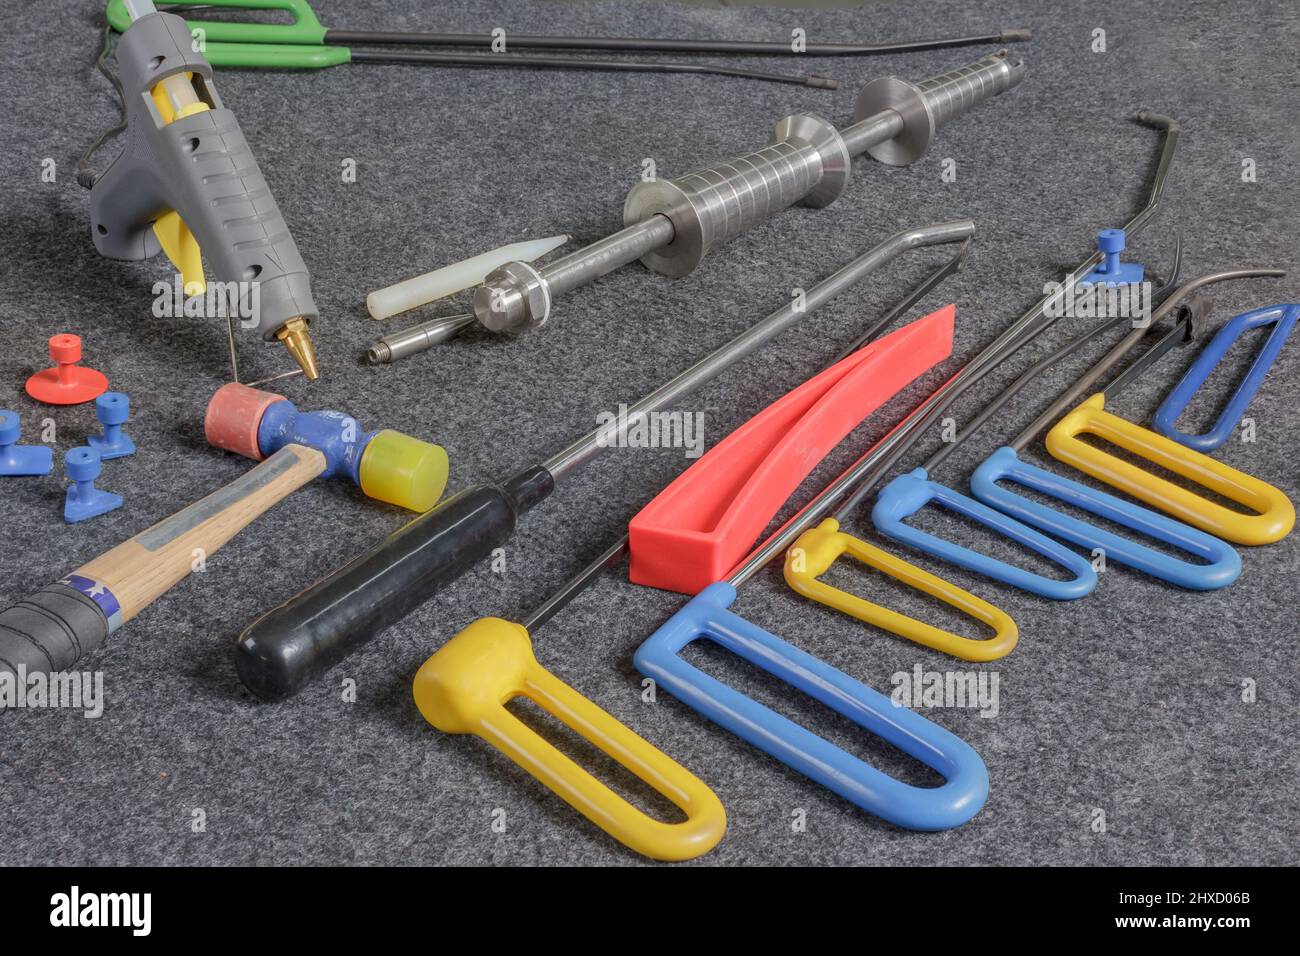 Paintless Dent Repair Kit Tools Set On The Work Table. Tools For Repair  Dents On Car Body Stock Photo - Alamy